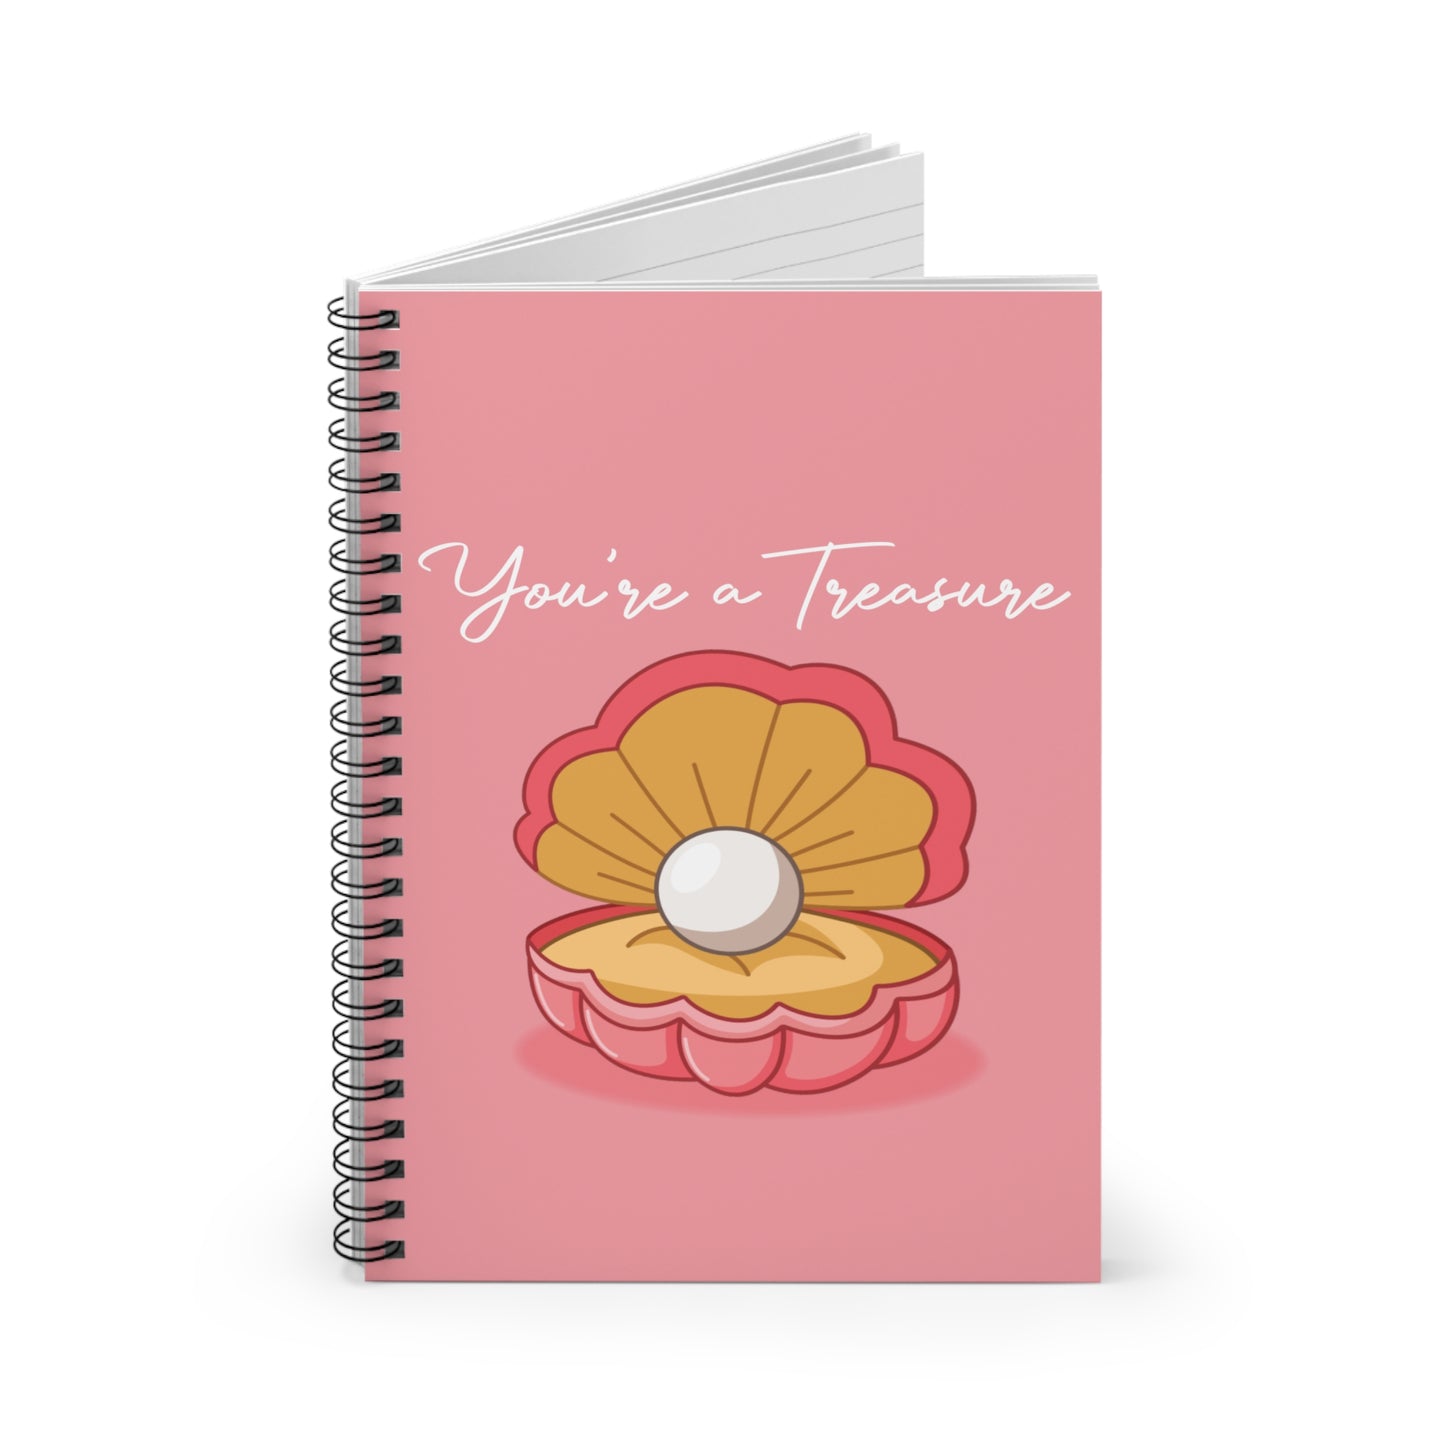 Mother of Pearl Spiral Notebook - Ruled Line